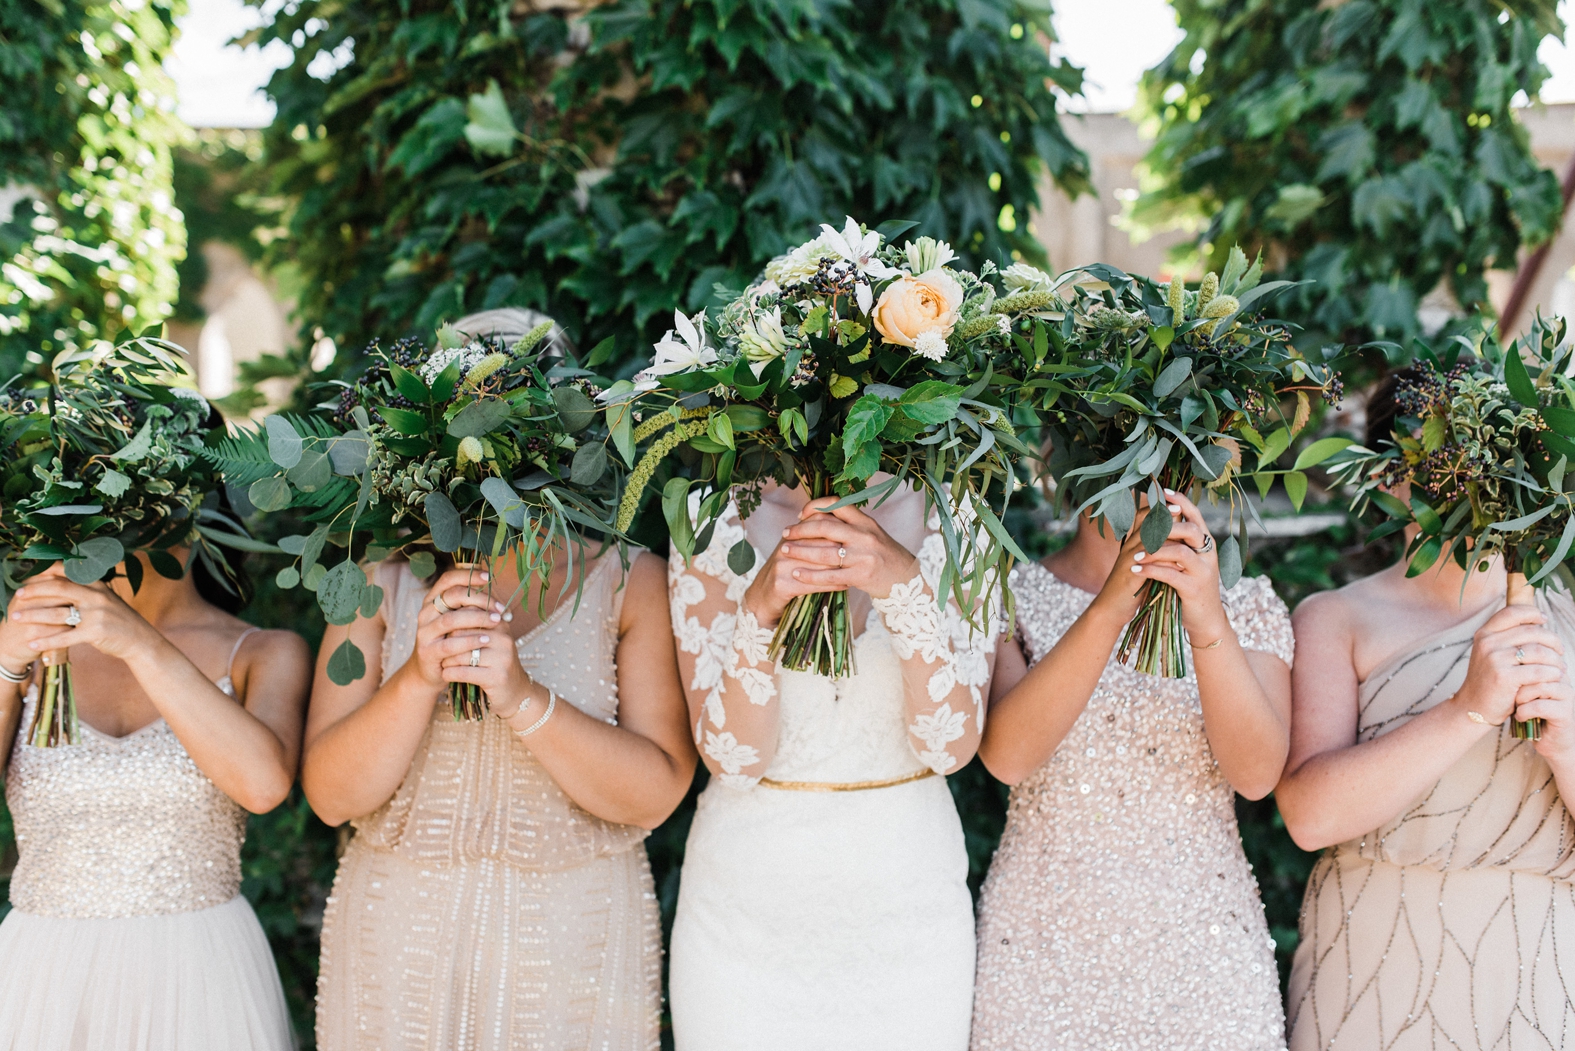 Bridesmaids in blush and neutral sequined and beaded detail bridesmaid dresses. Bride in long sleeve lace wedding gown with gold bridal belt. Bridesmaid bouquets with greenery. 